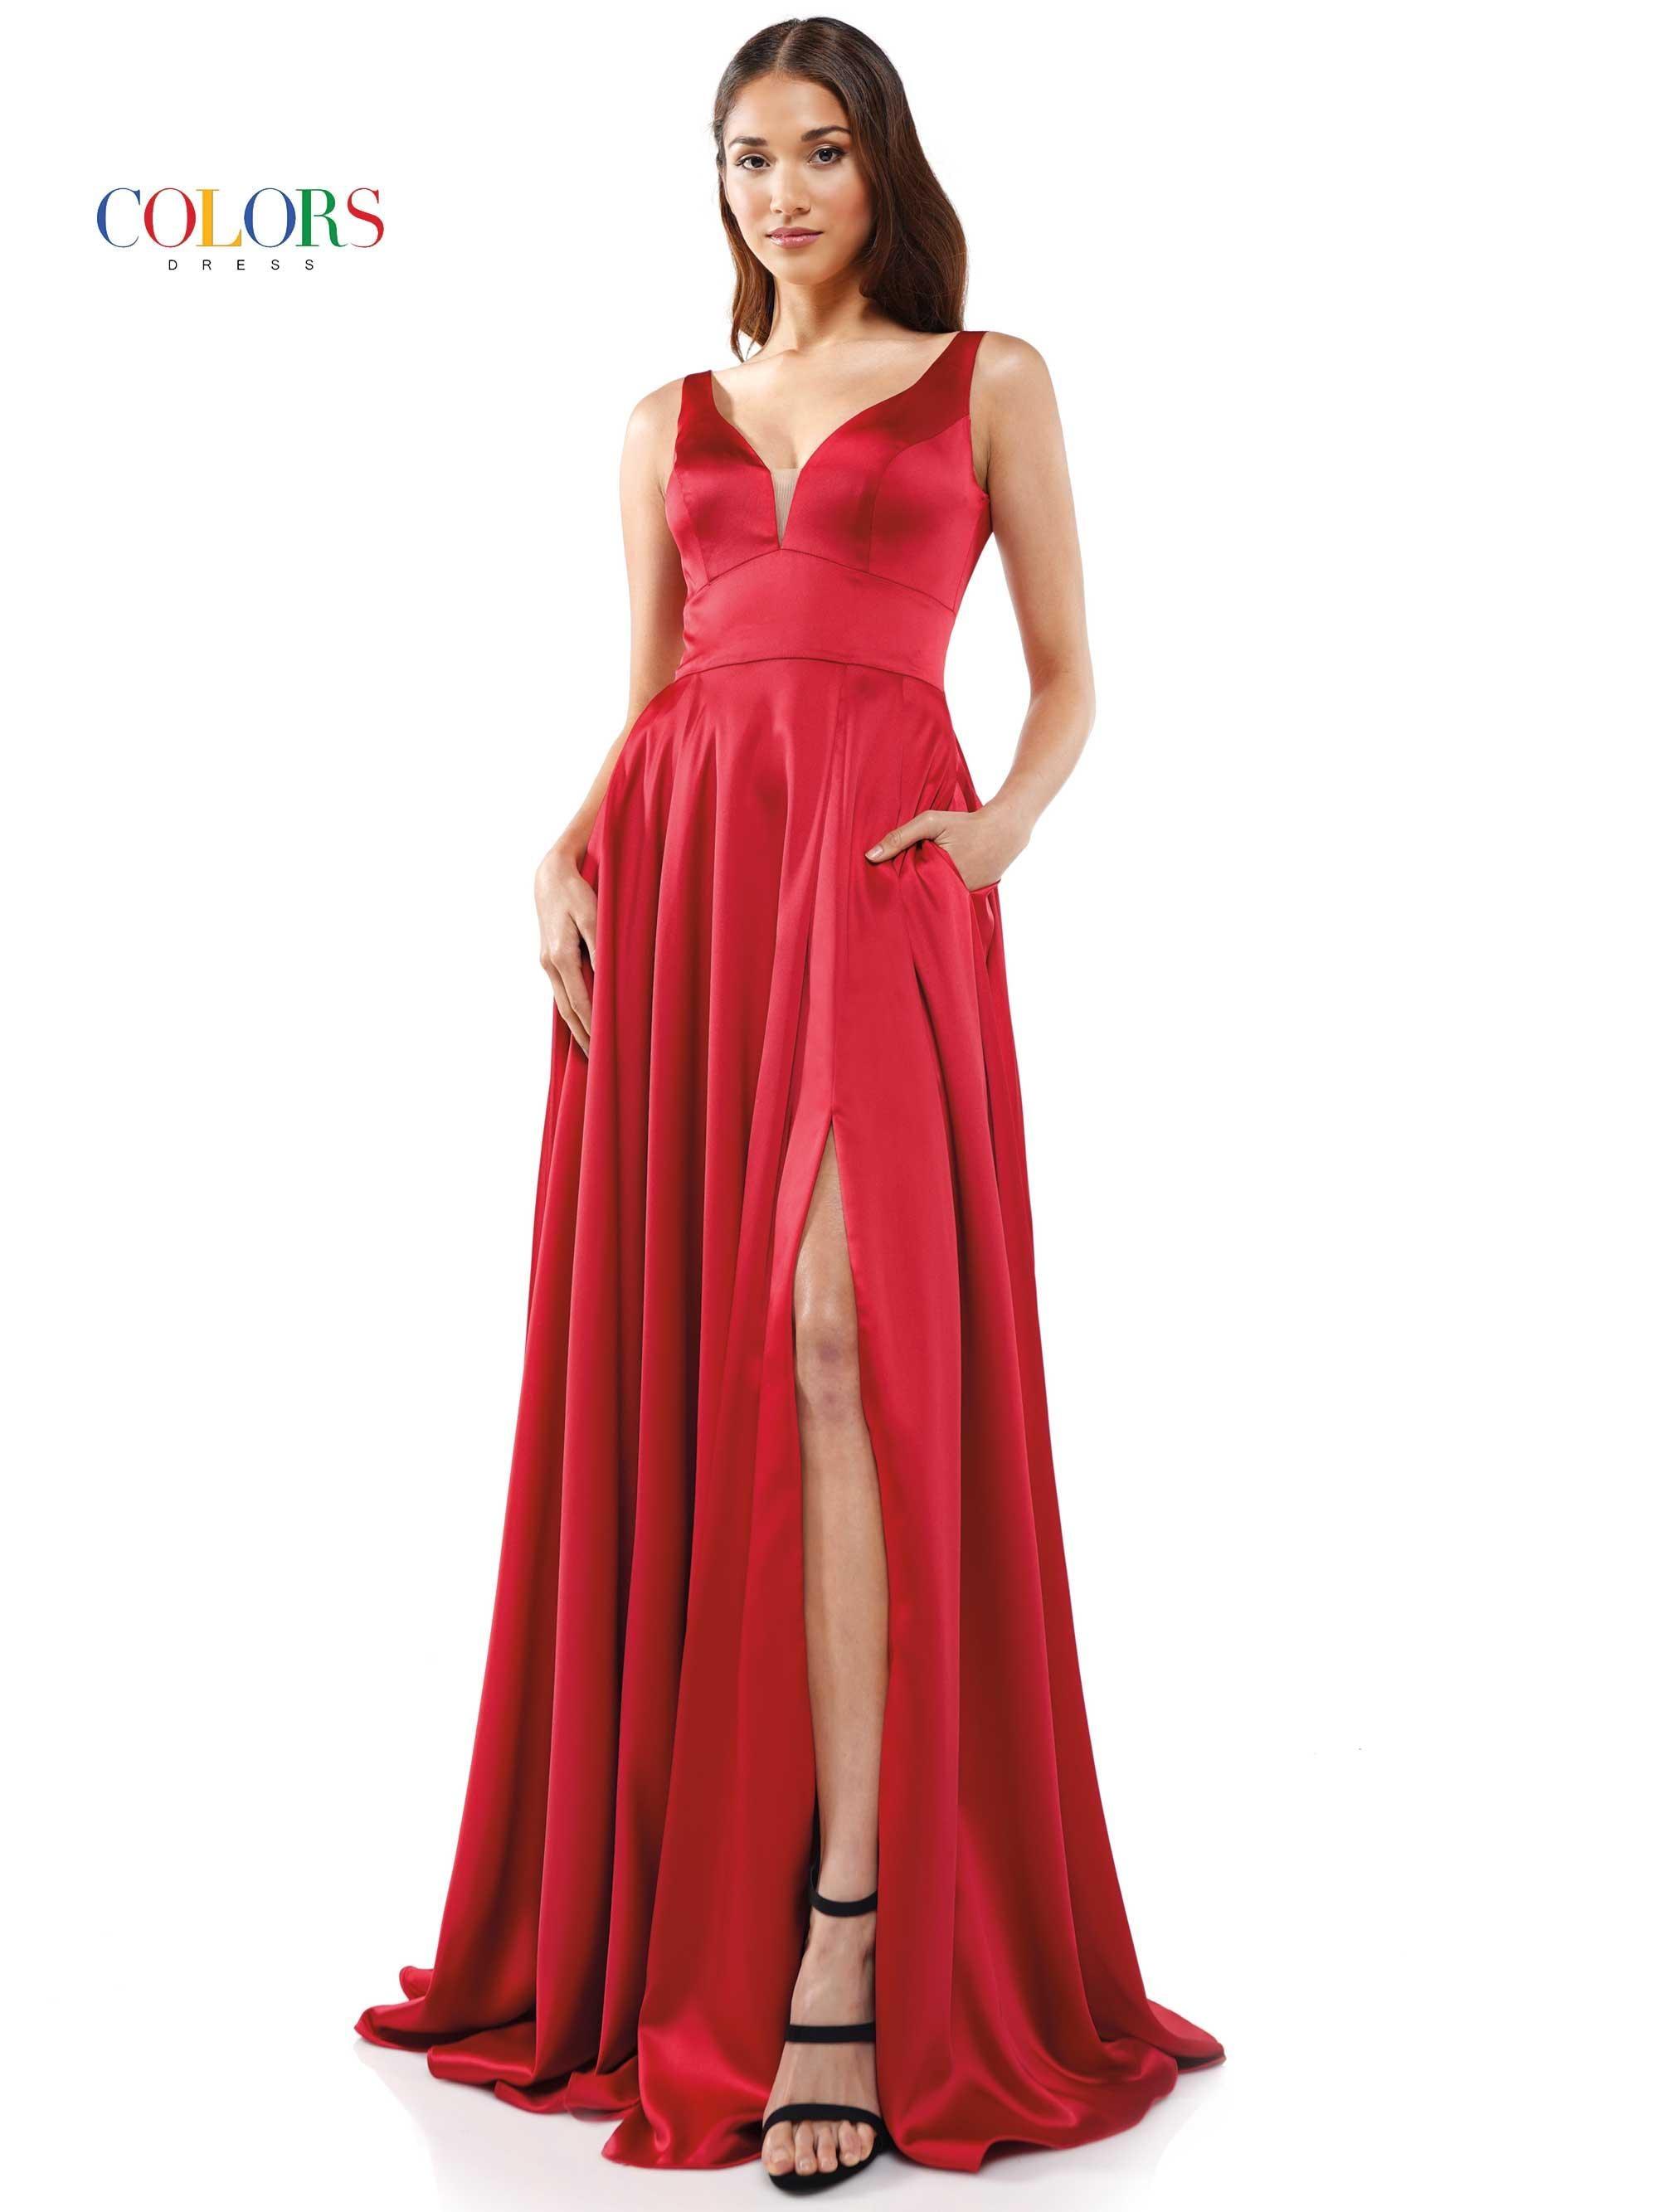 Colors Long Sleeveless Formal Prom Dress 904 - The Dress Outlet